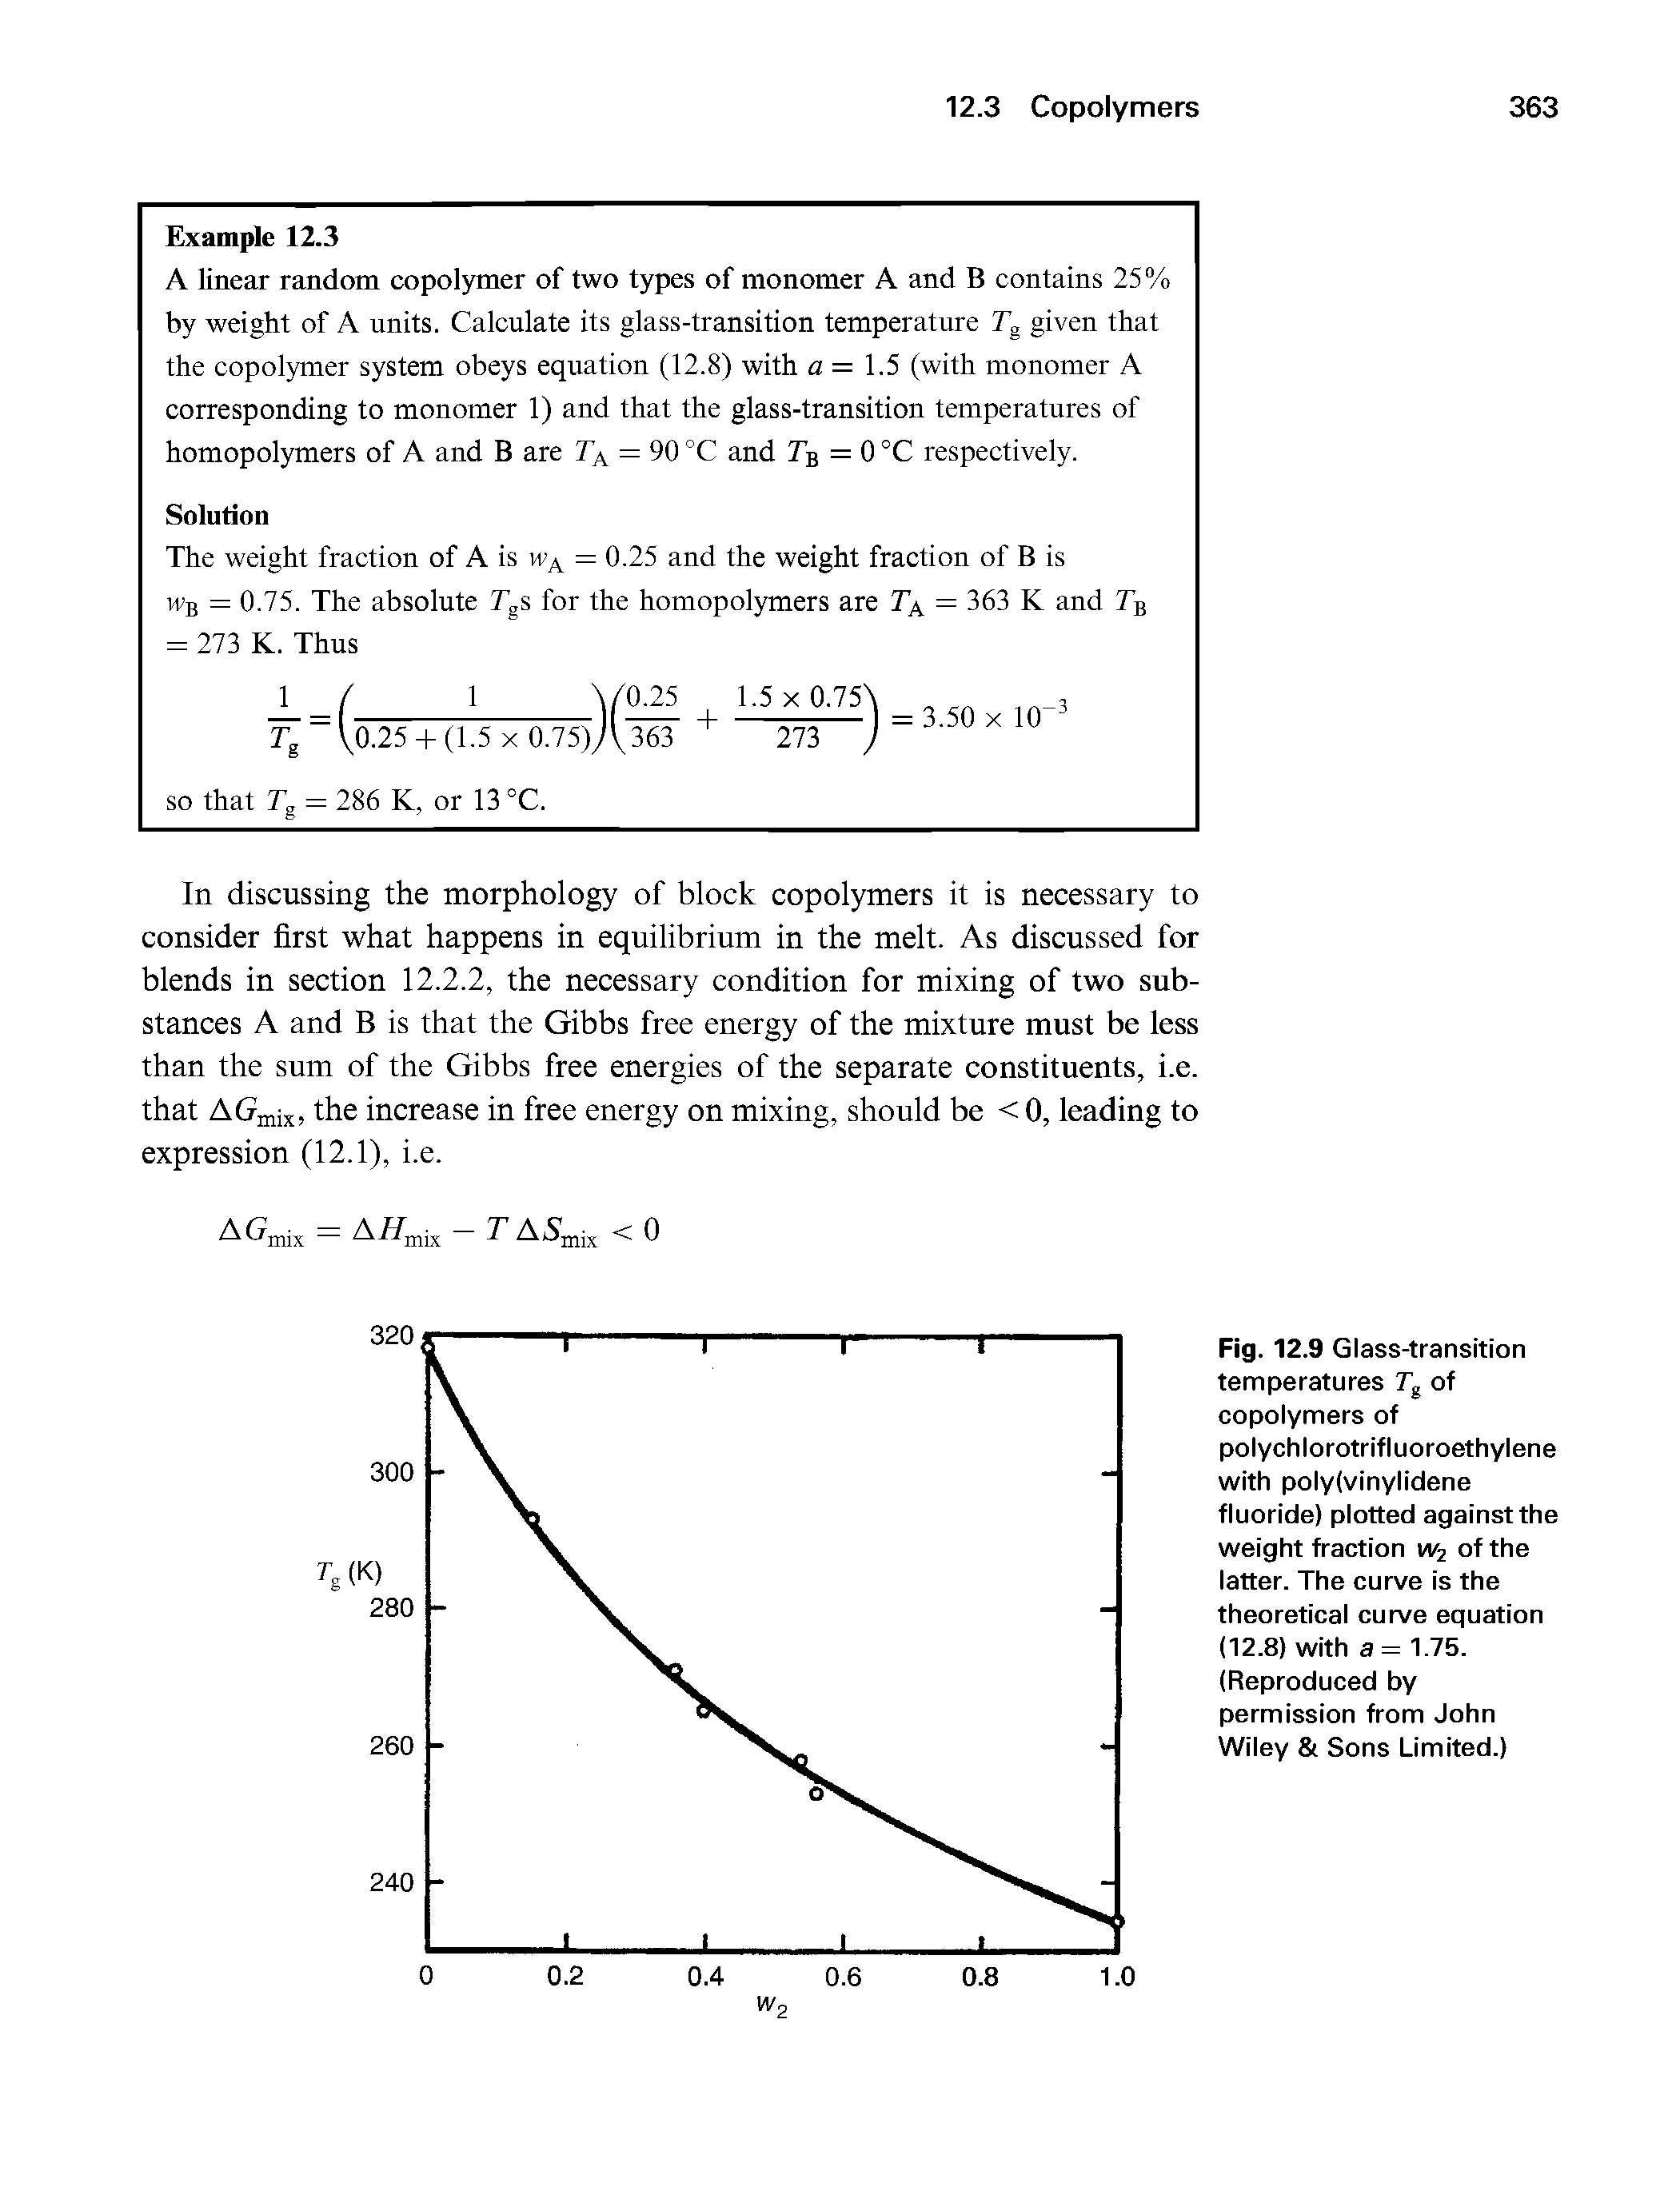 Fig. 12.9 Glass-transition temperatures Tg of copolymers of polychlorotrifluoroethylene with polylvinylidene fluoride) plotted against the weight fraction of the latter. The curve is the theoretical curve equation (12.8) with a = 1.75. (Reproduced by permission from John Wiley Sons Limited.)...